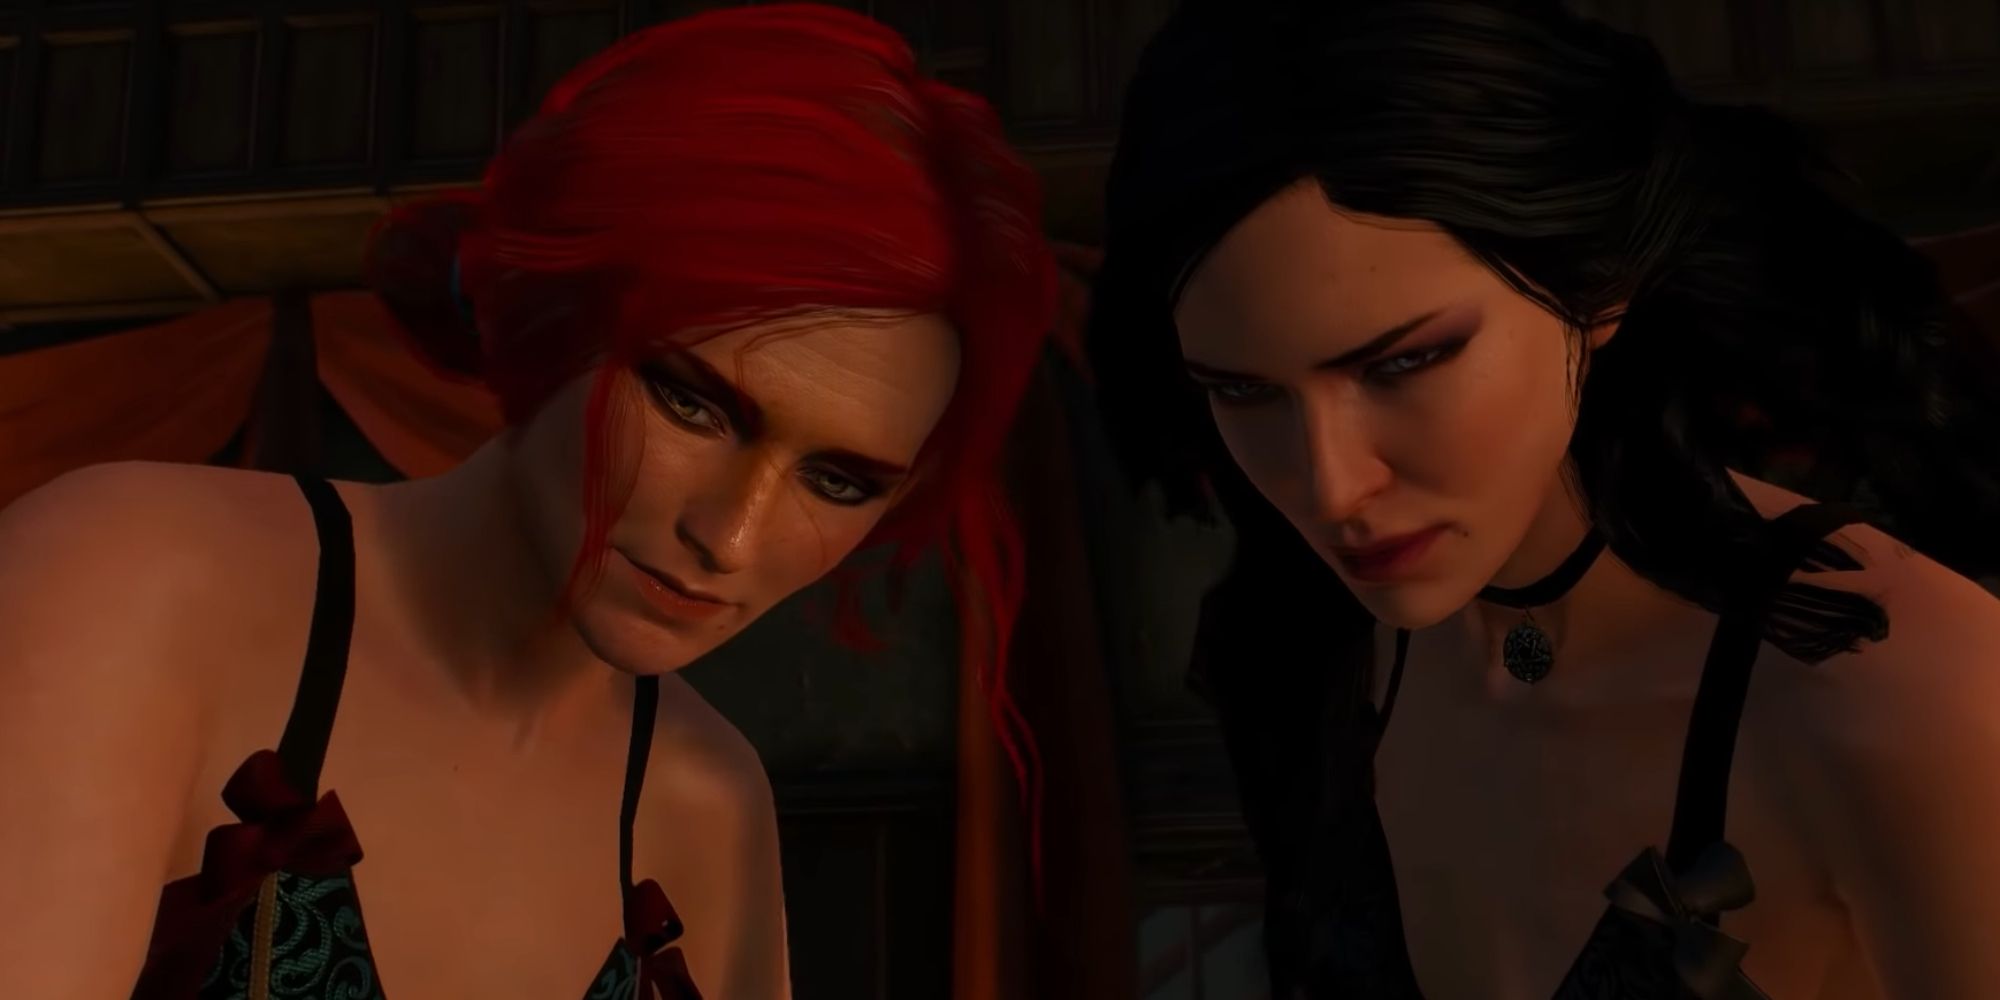 This Week In Modding: Witcher Genital Drama, More Mass Effect Romances